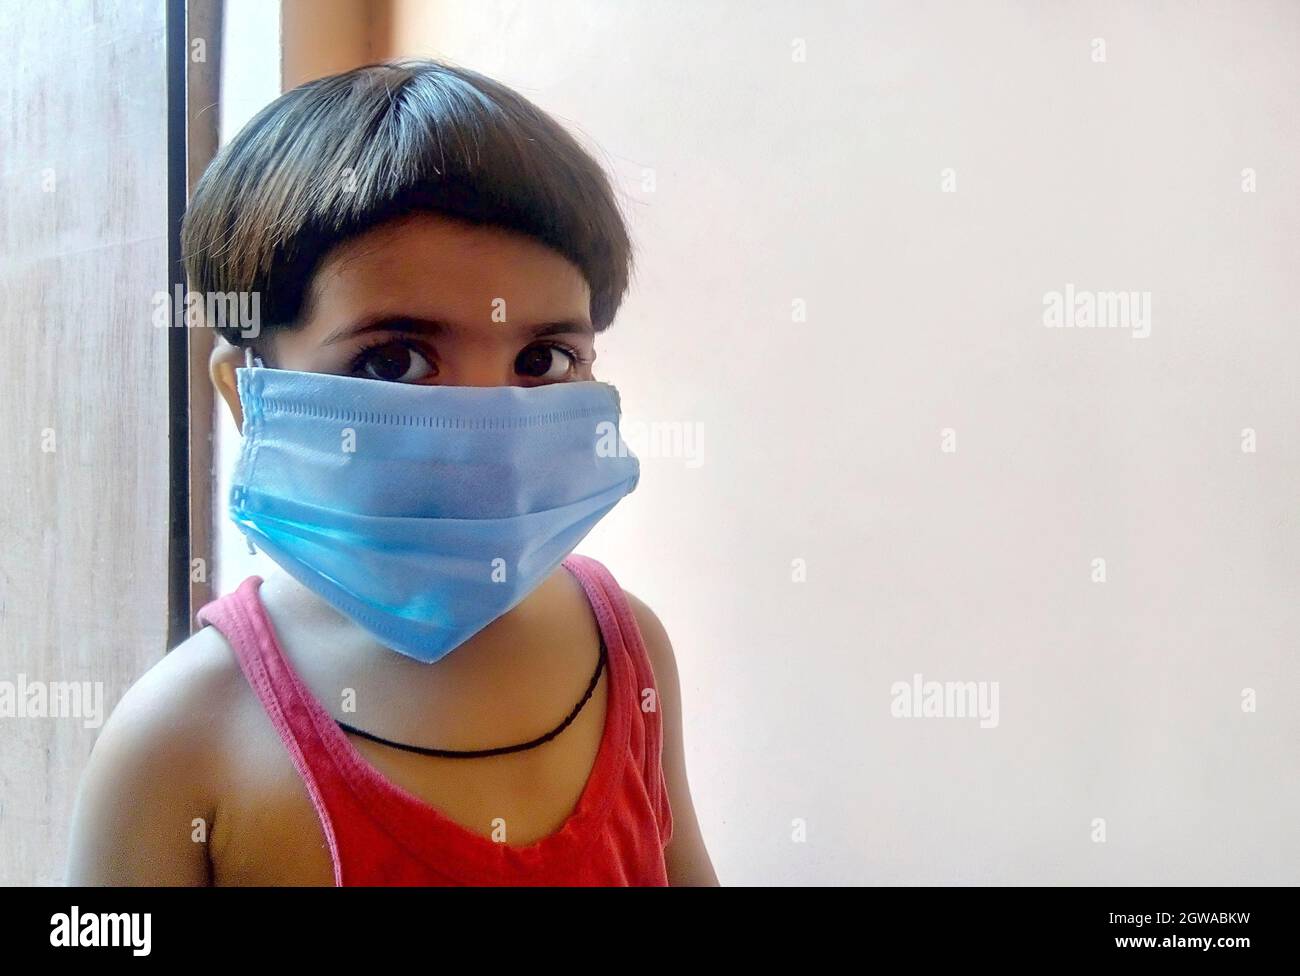 Indian Kid Wearing Protective Face Mask While Standing Against Door At Home Stock Photo